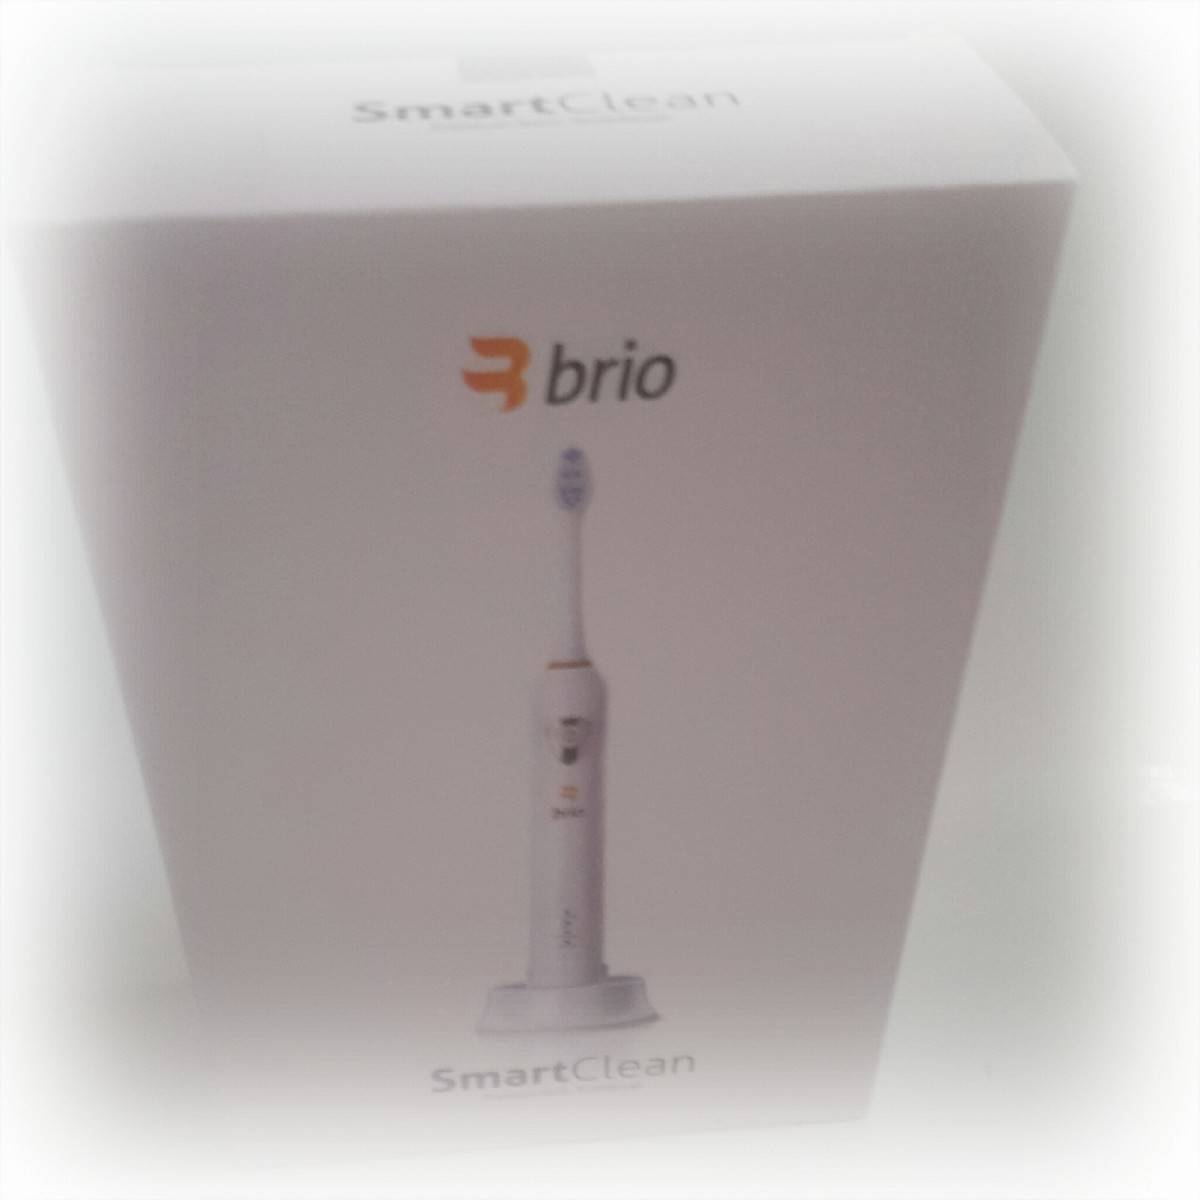 Brio SmartClean Sonic Electric Toothbrush Review